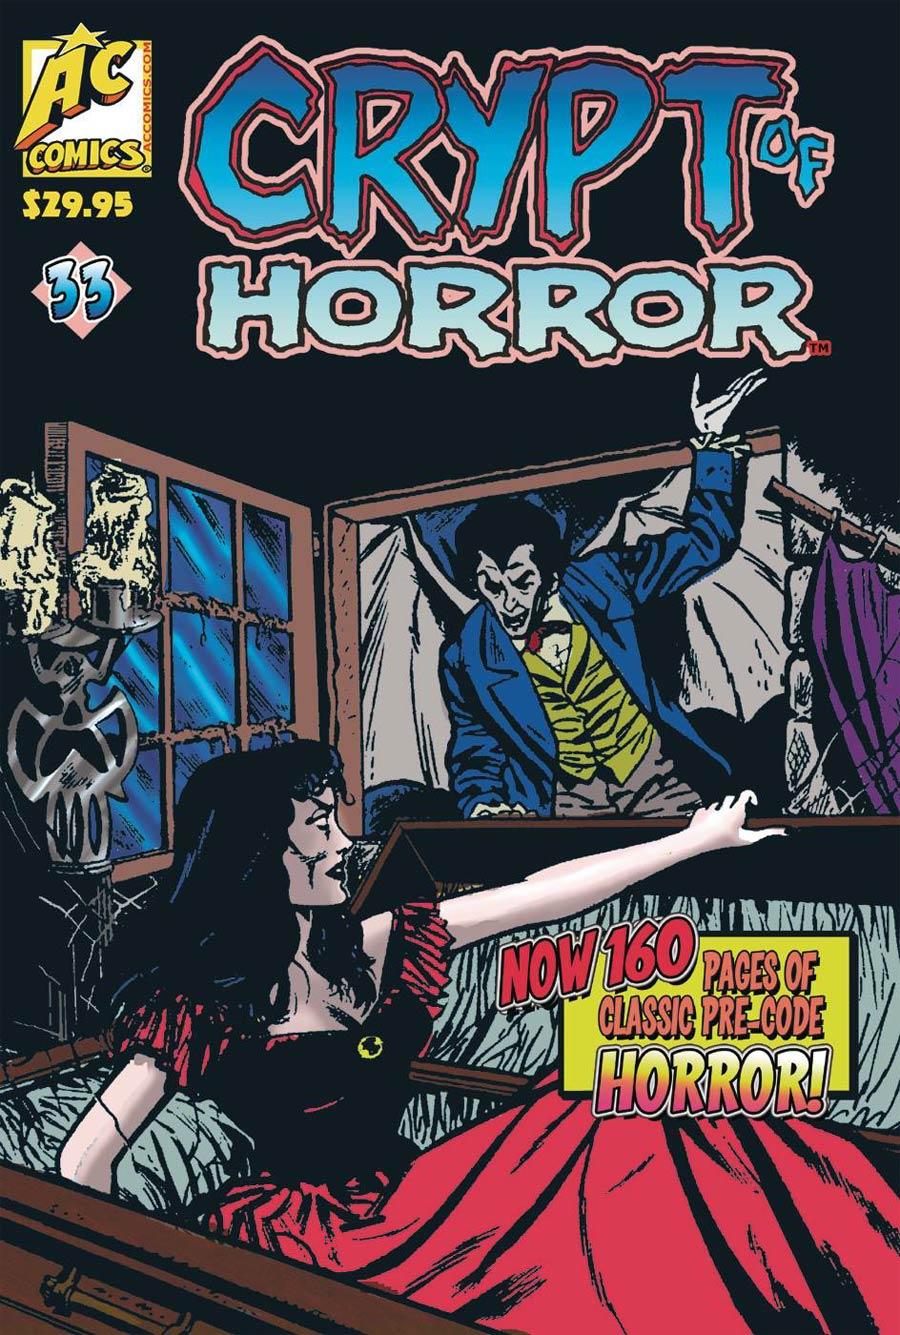 Crypt Of Horror Vol. 1 #33